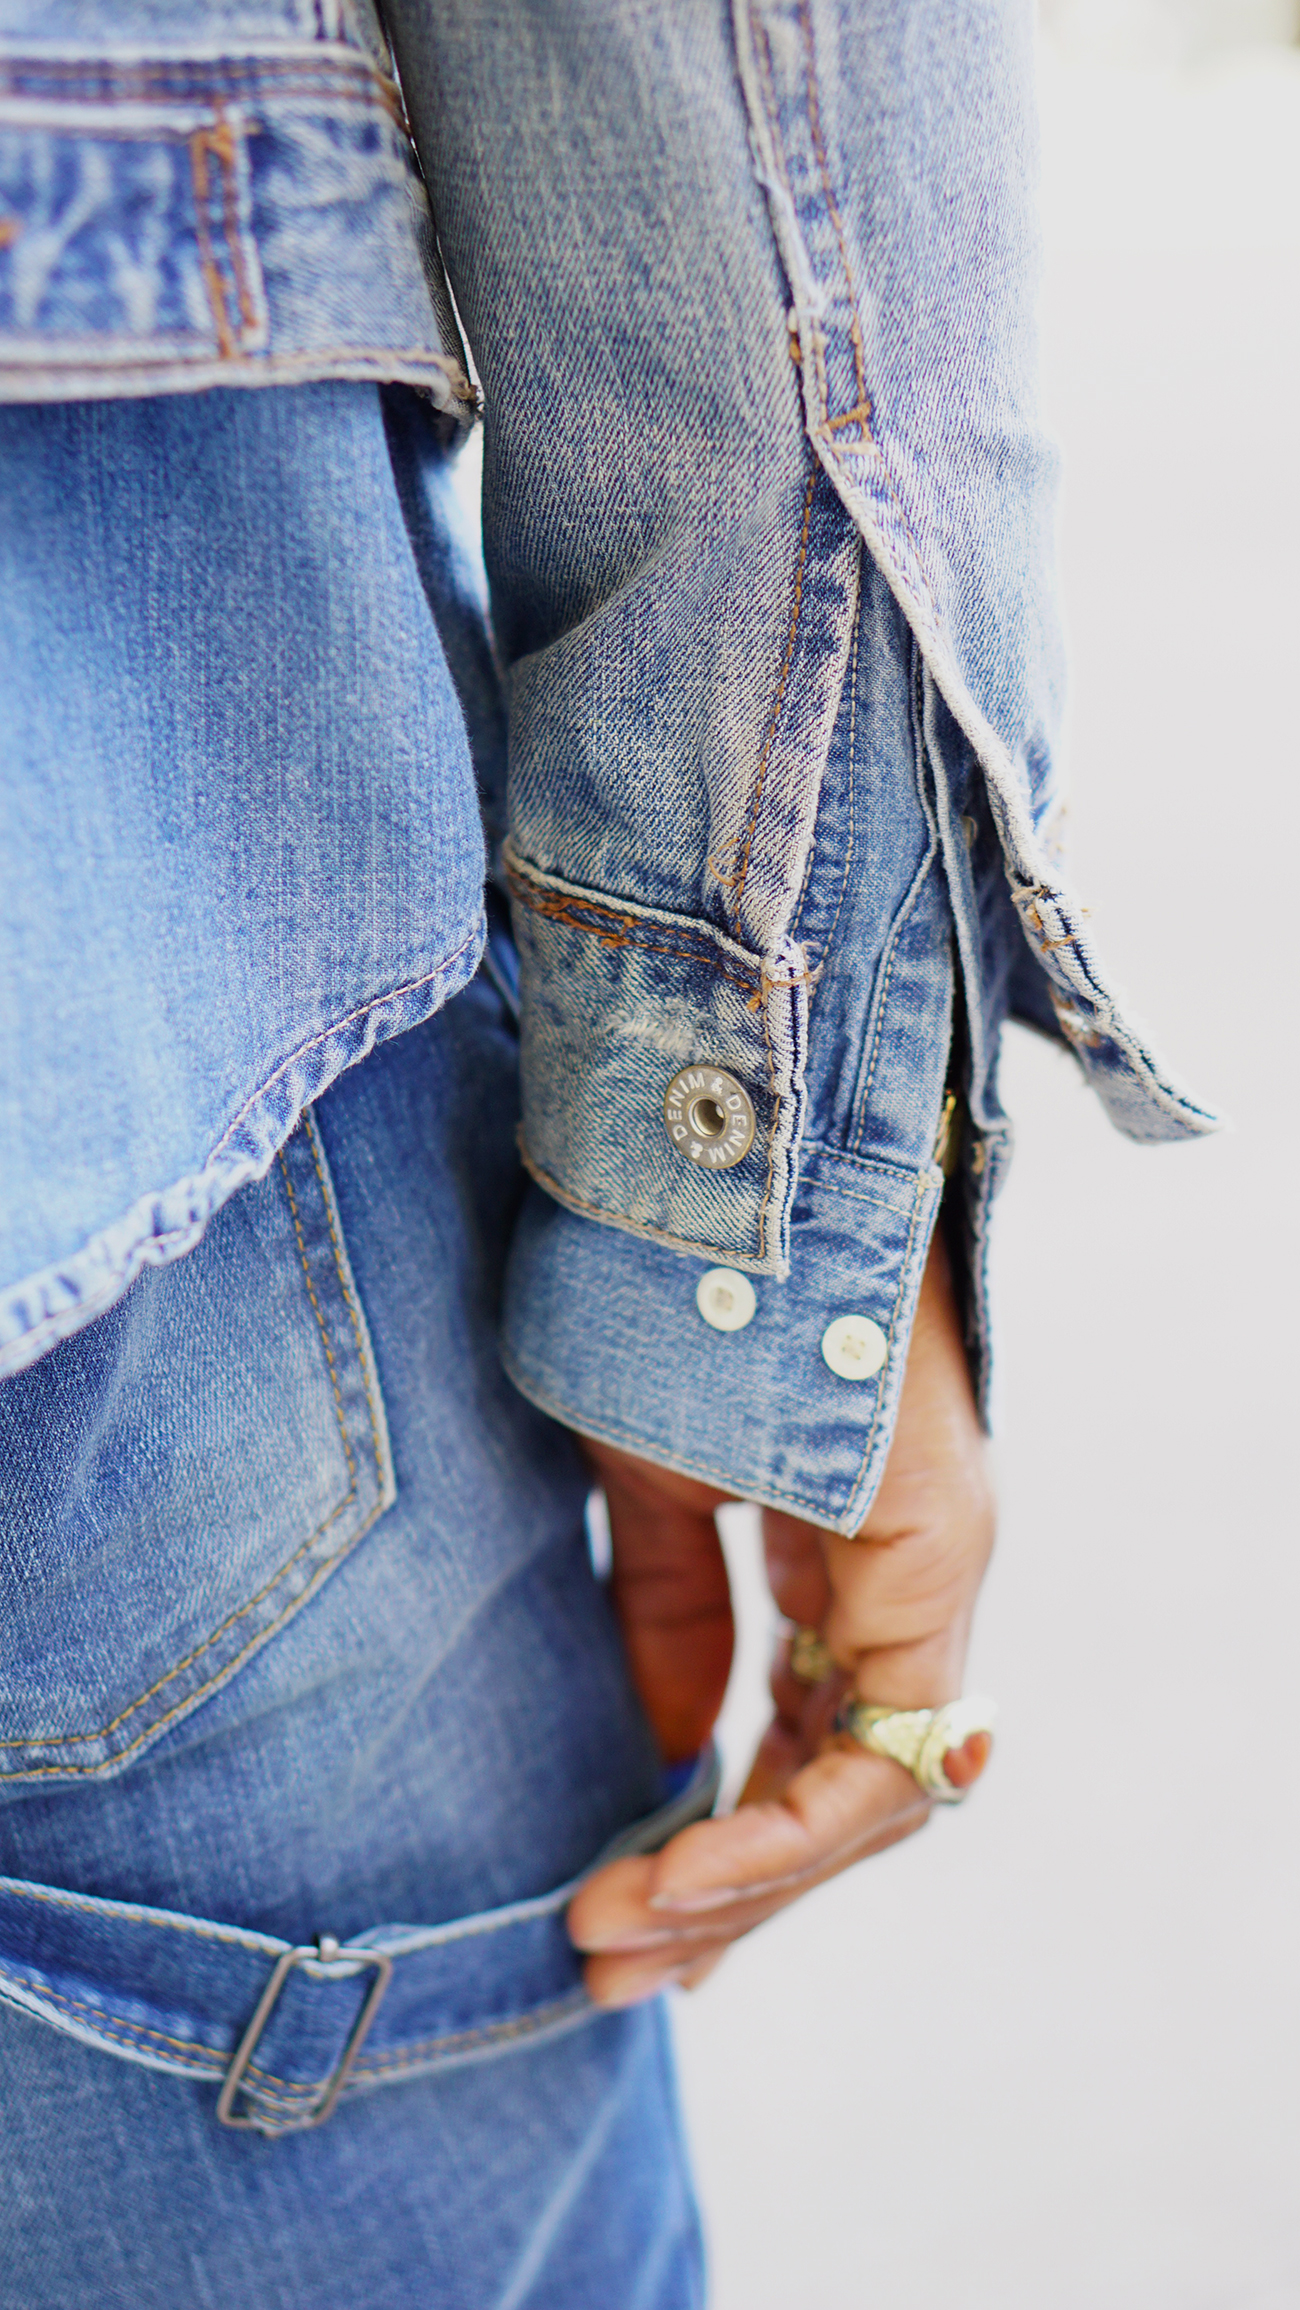  OOTD  DENIM  LAYERING WITH OVERALLS  Norris Danta Ford